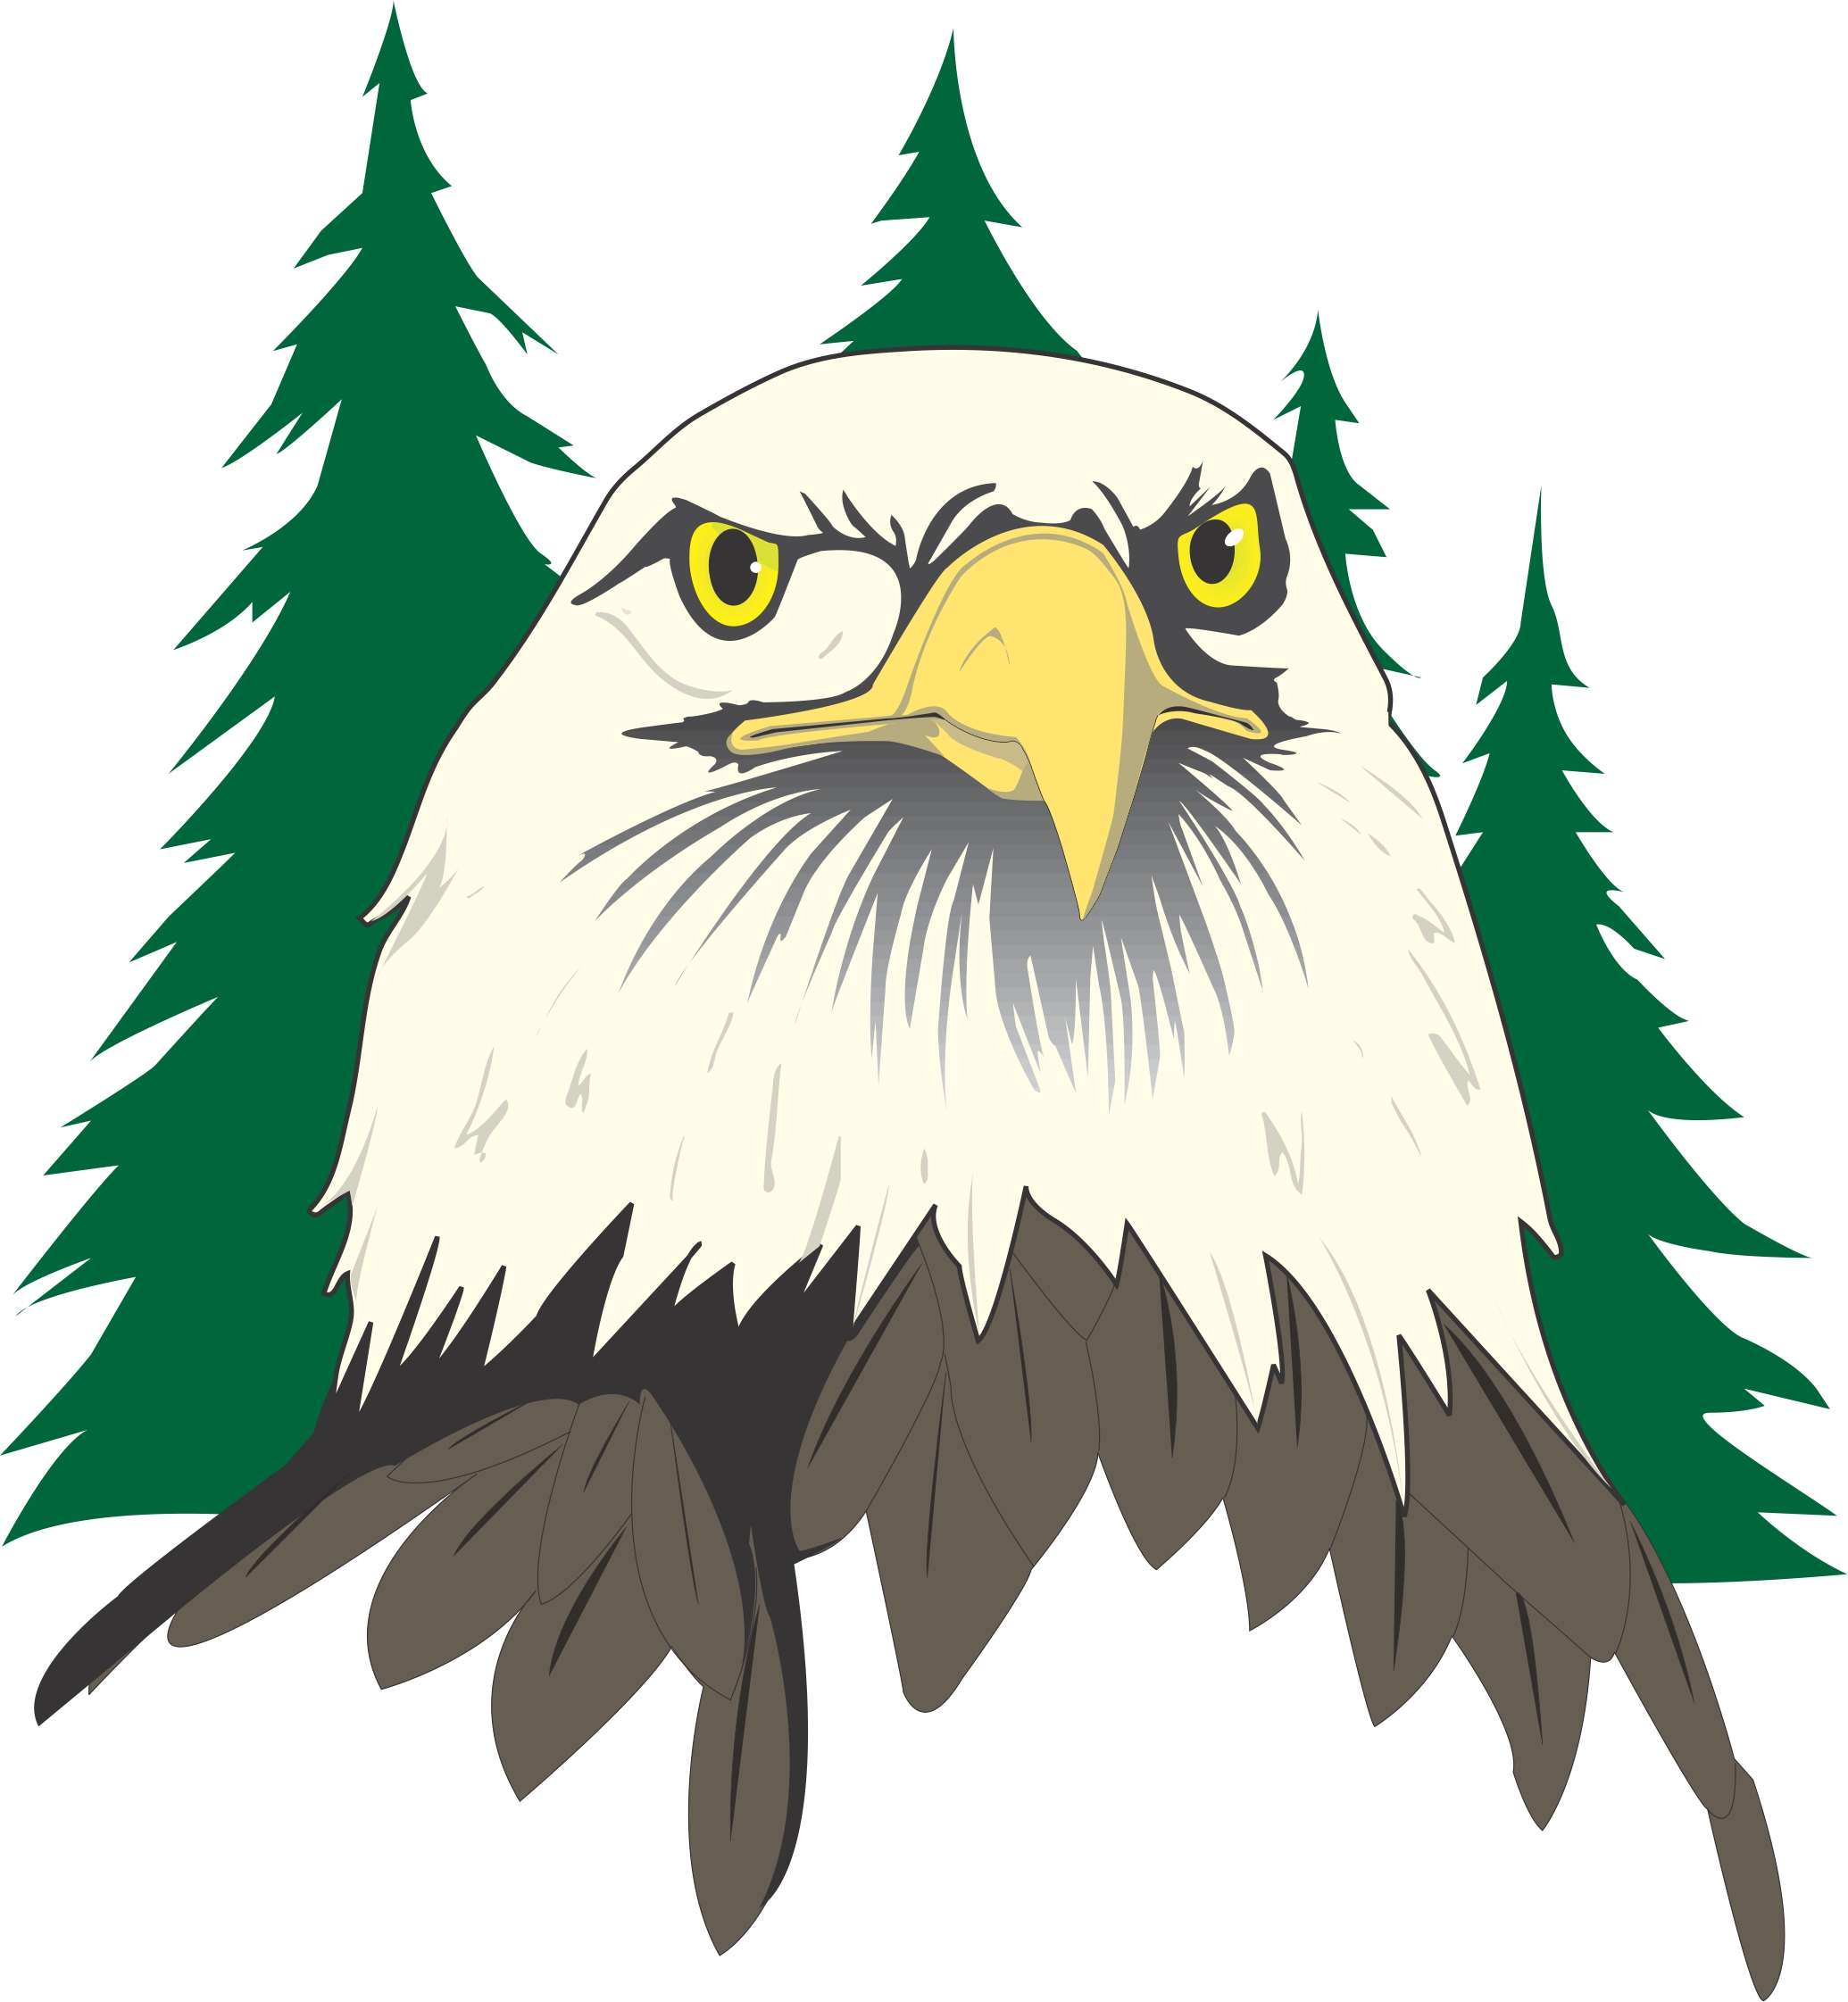 Pictures Of Cartoon Eagles - ClipArt Best